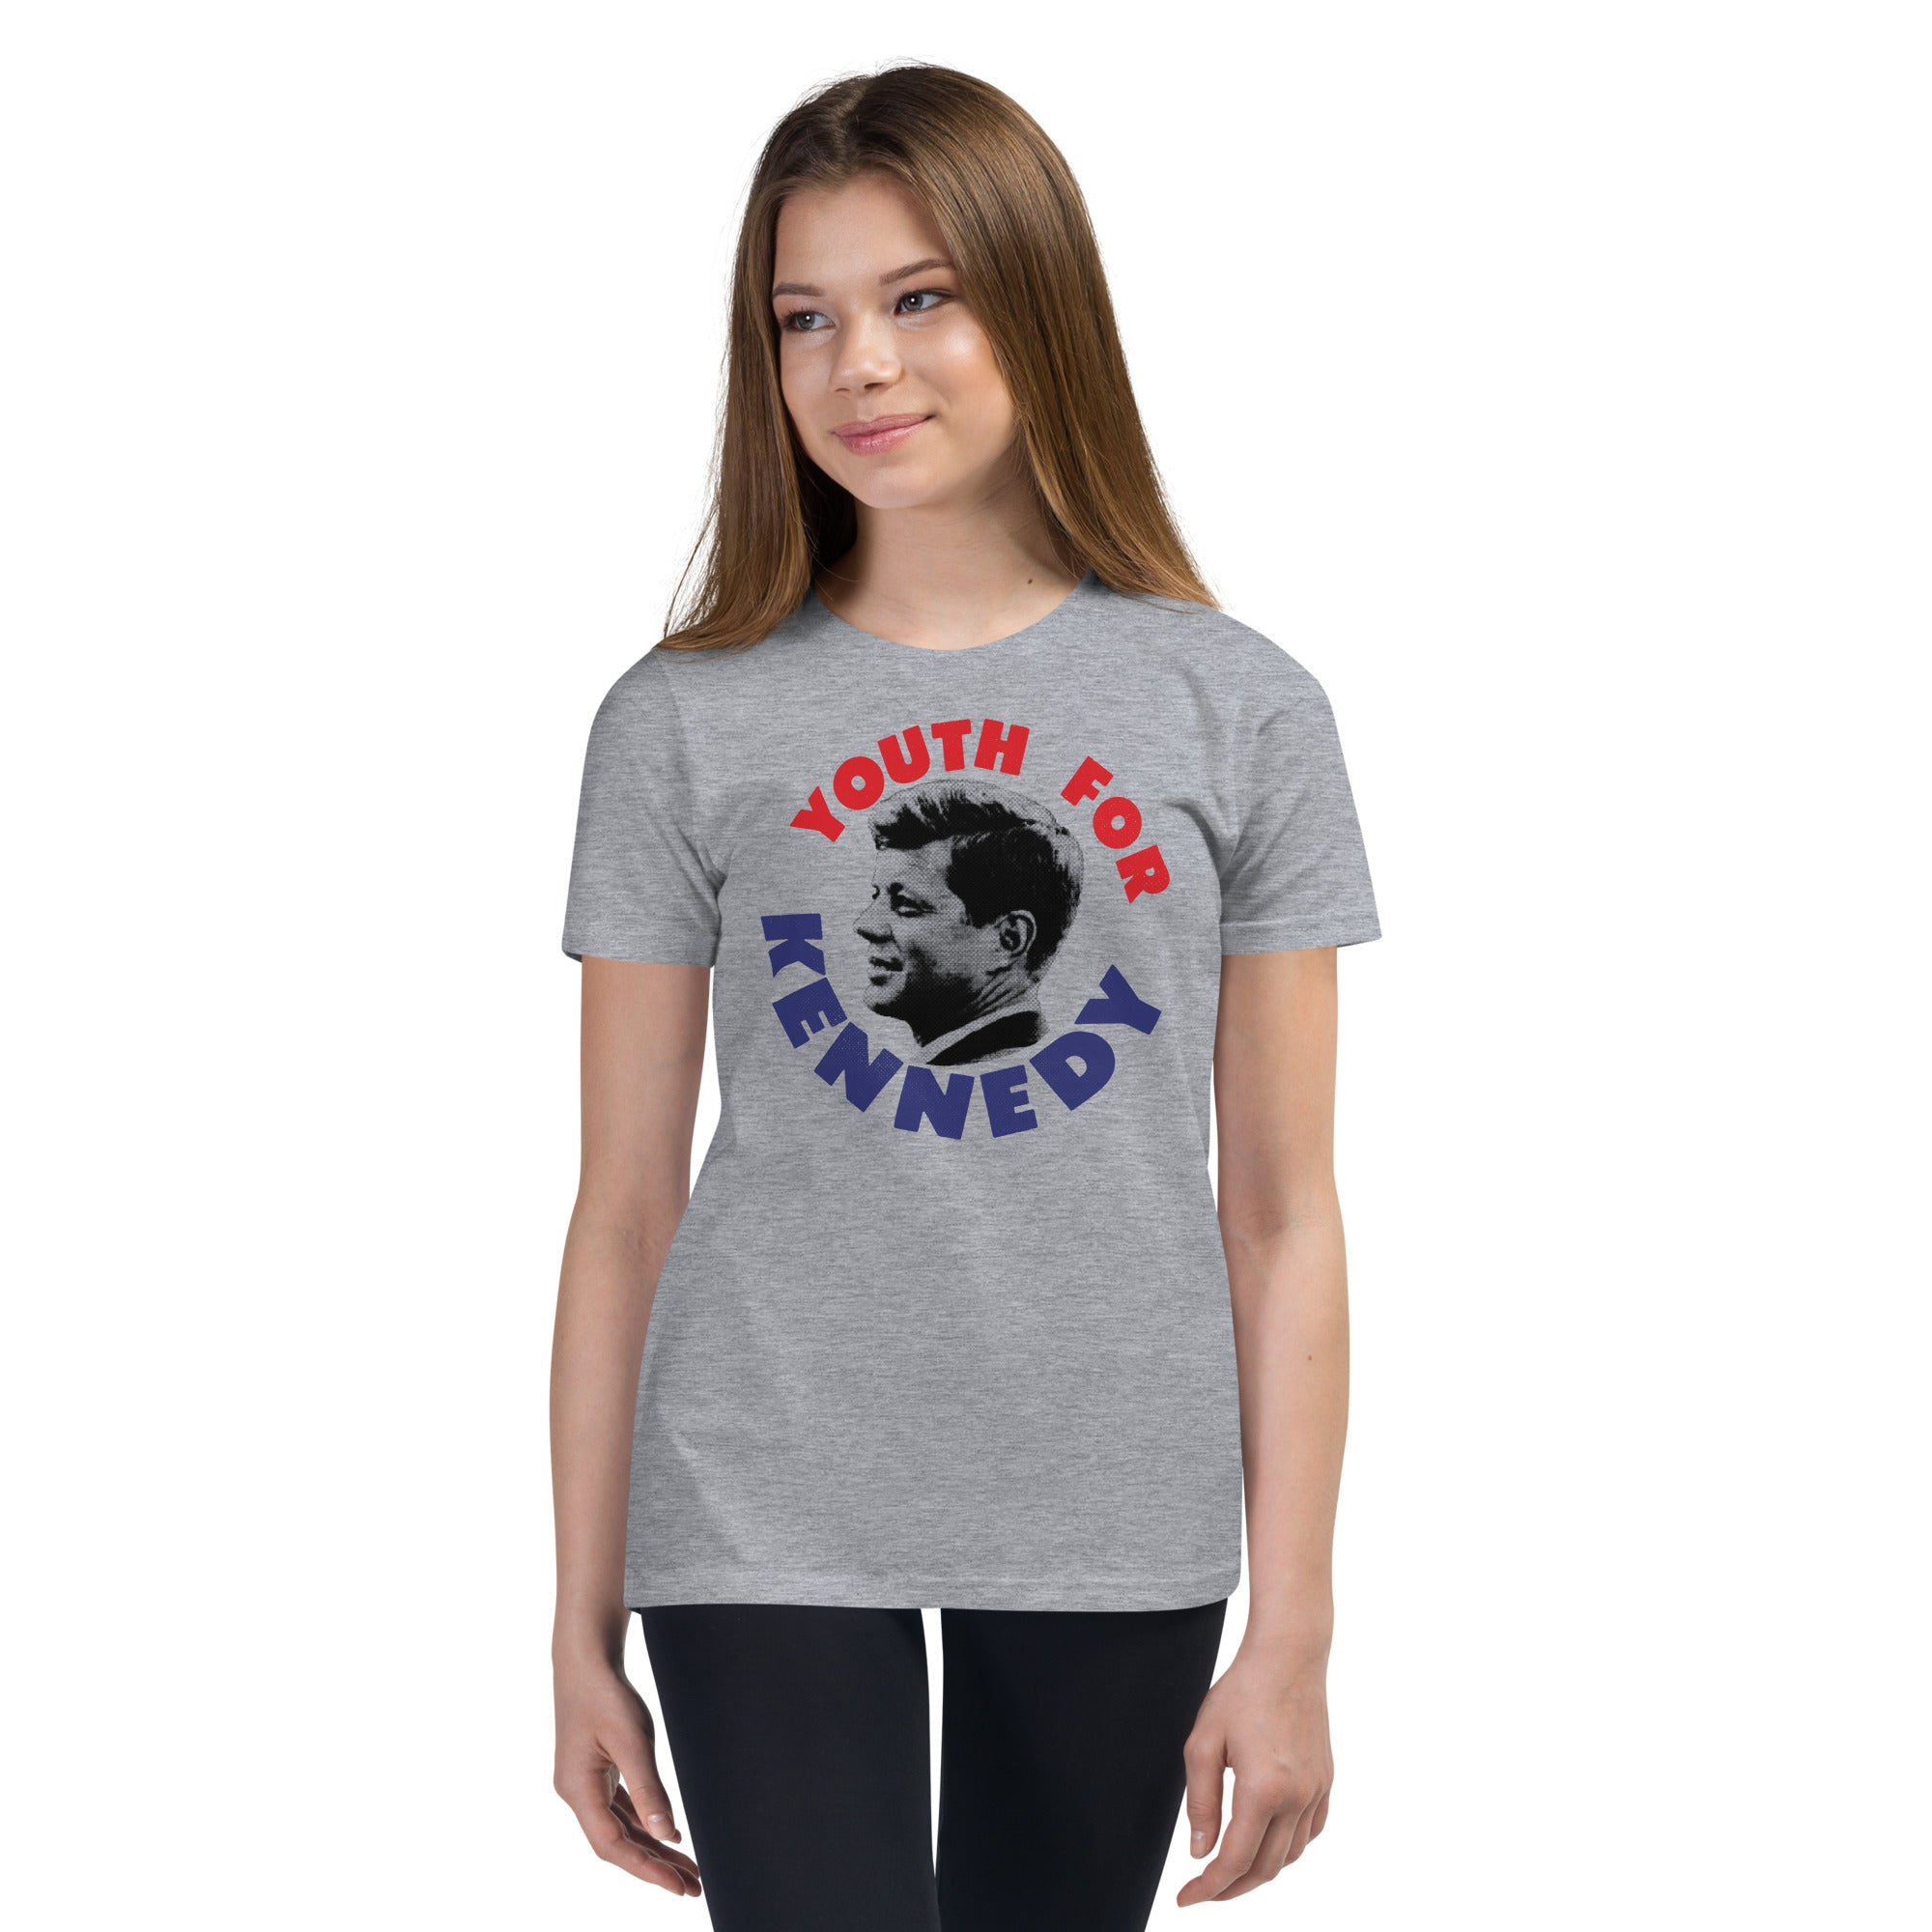 Youth for Kennedy Retro Youth Short Sleeve T-Shirt